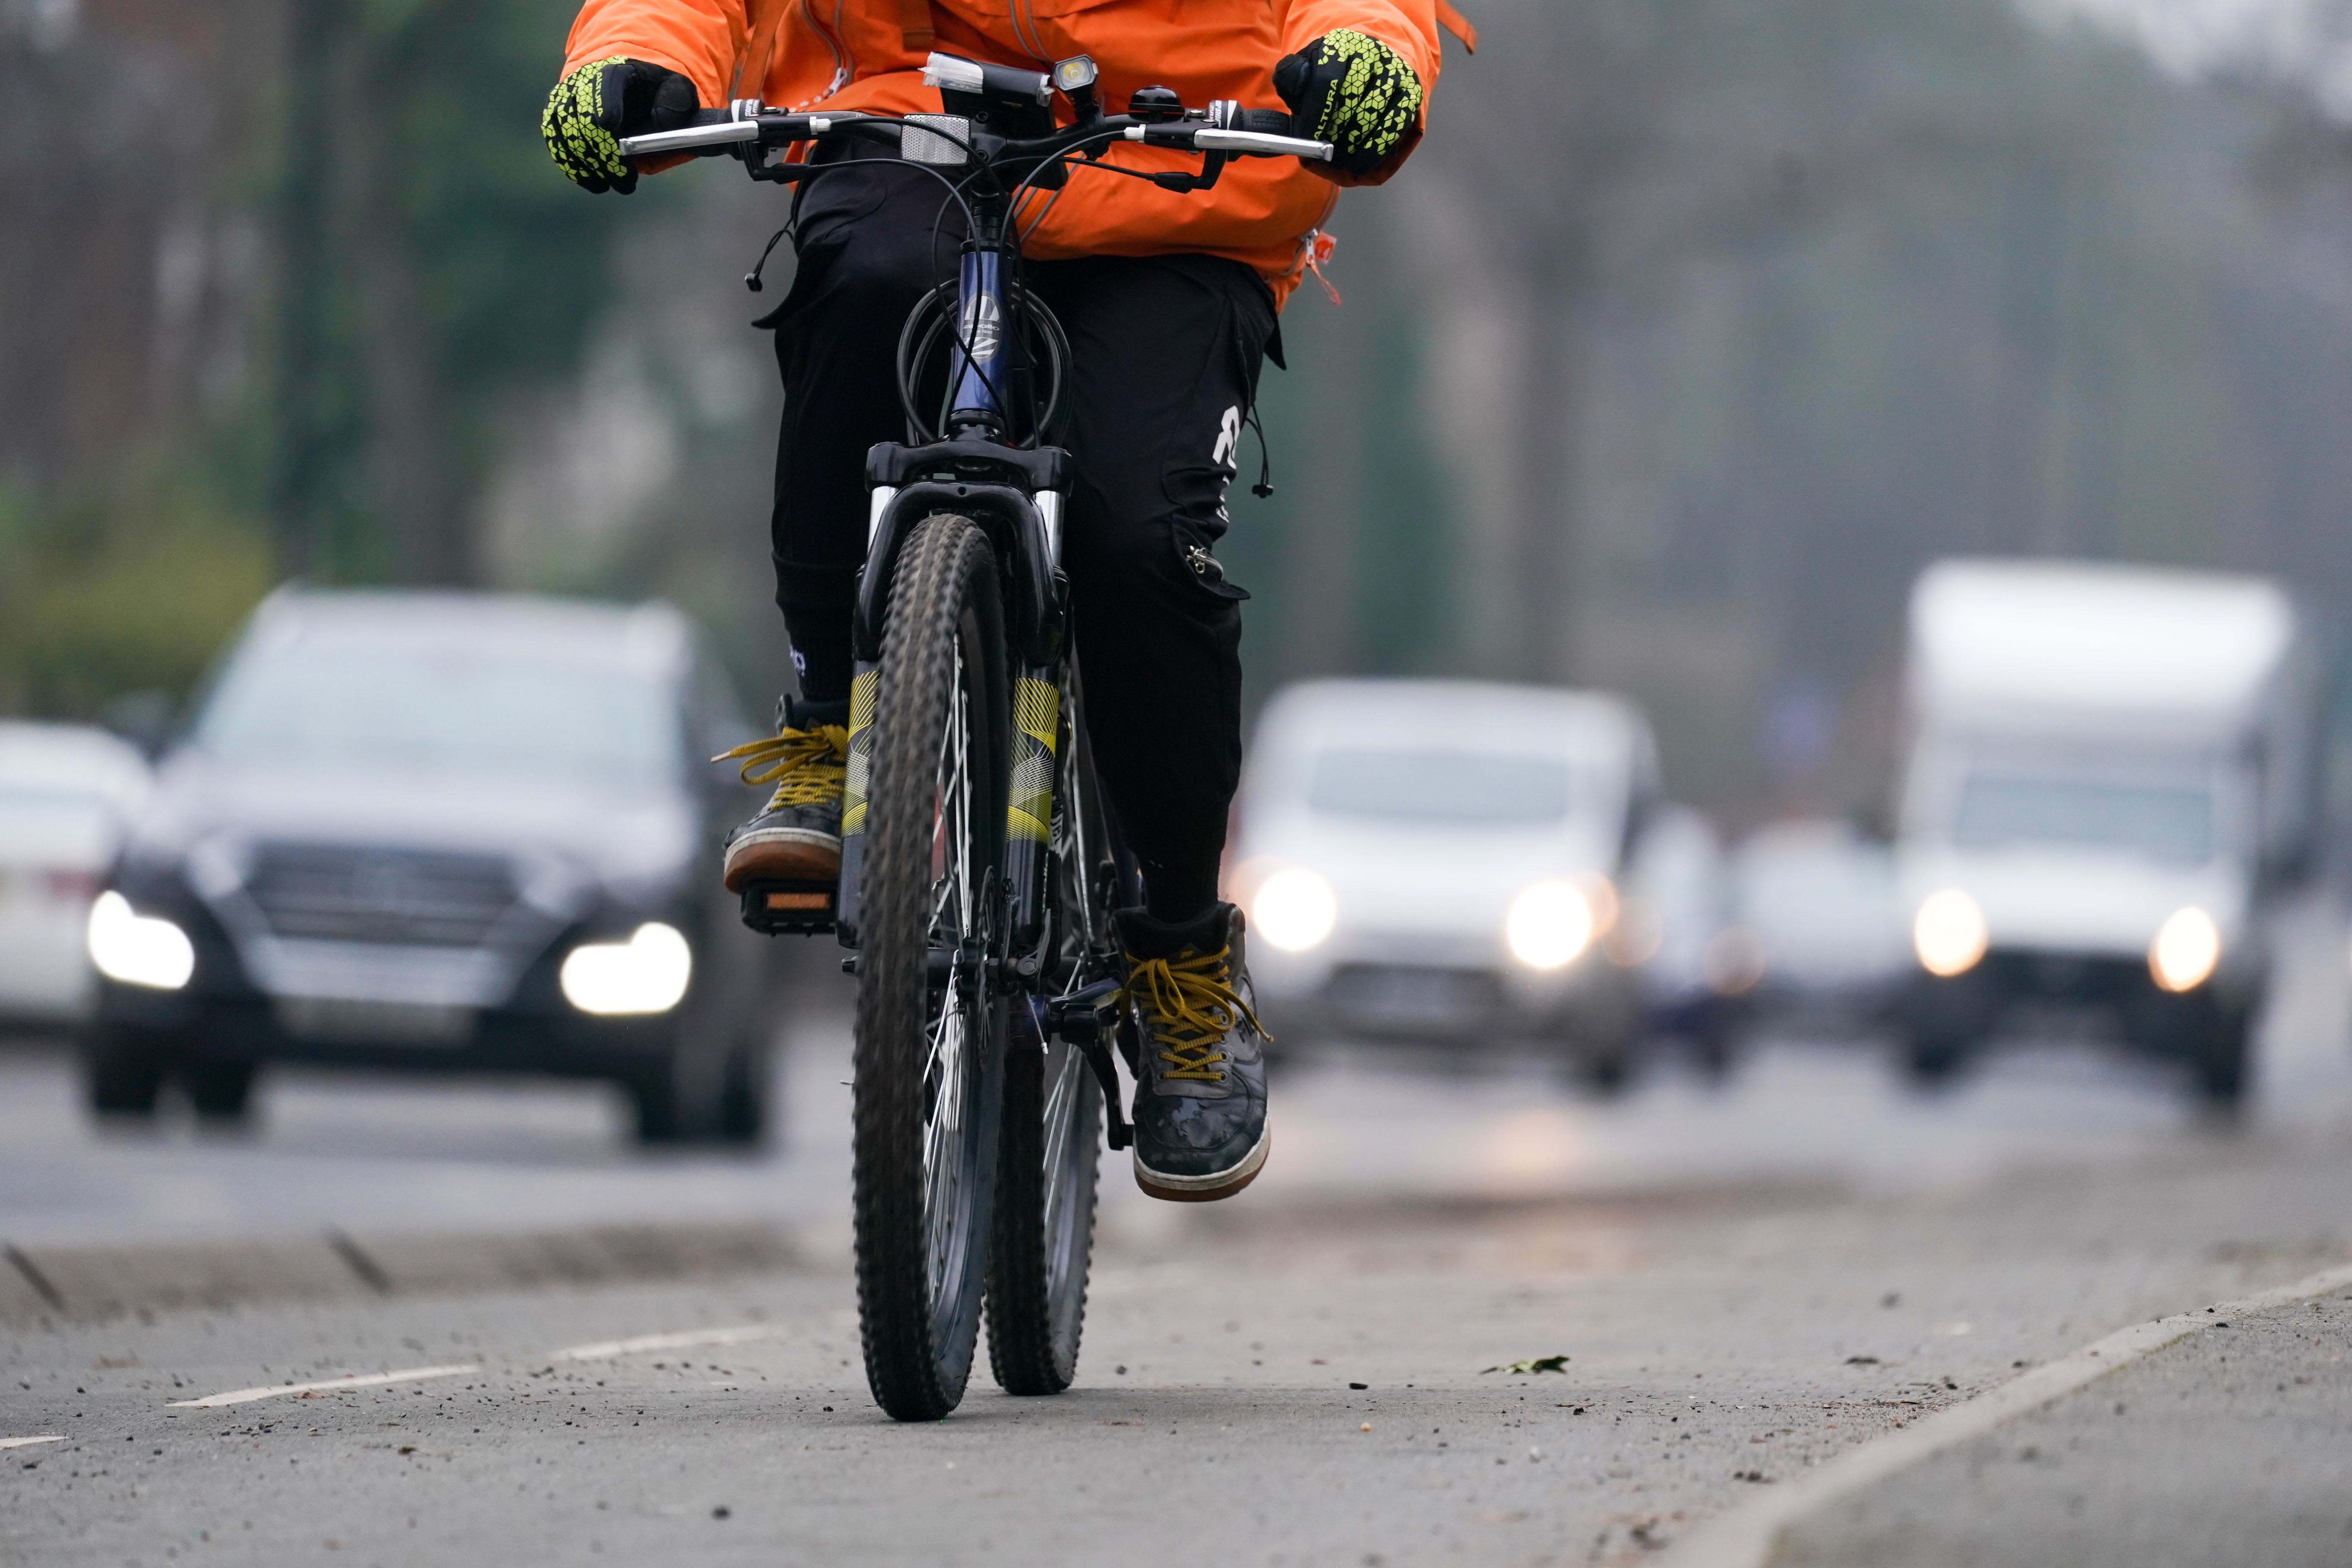 England’s chief medical officer praised efforts to promote walking and cycling during the Covid-19 pandemic (Jacob King/PA)